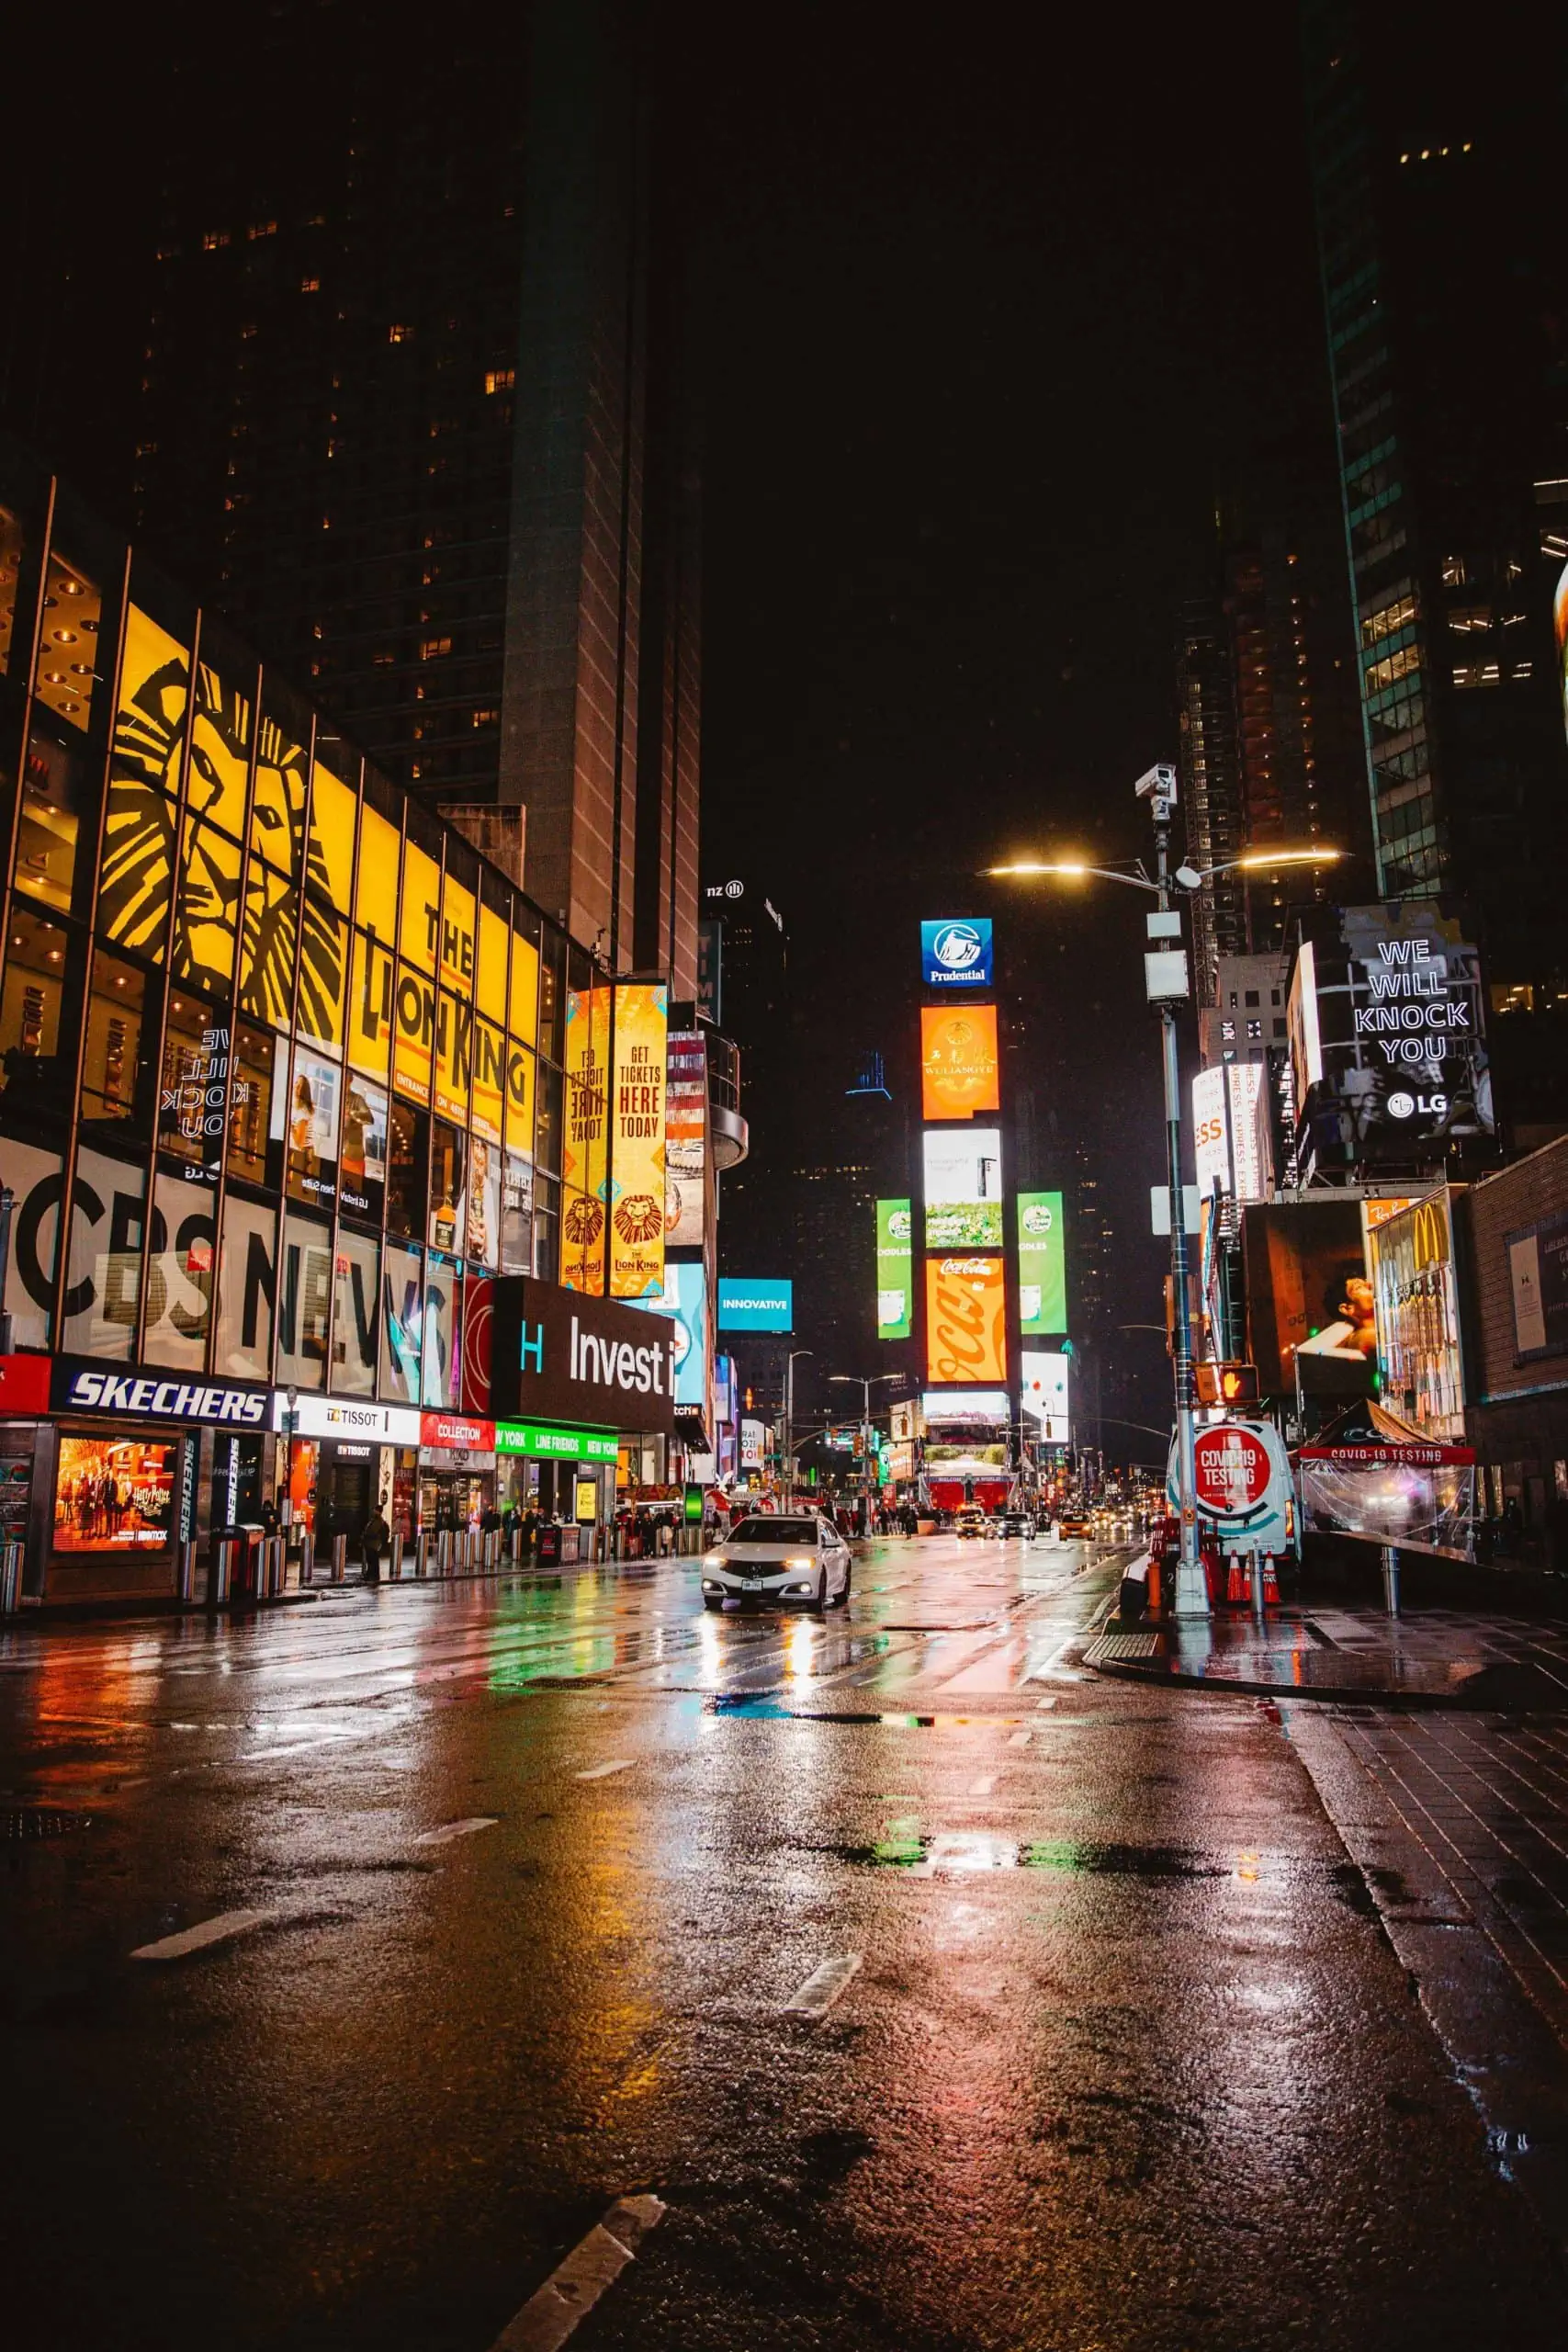 NYC Times square monitored by night vision security cameras